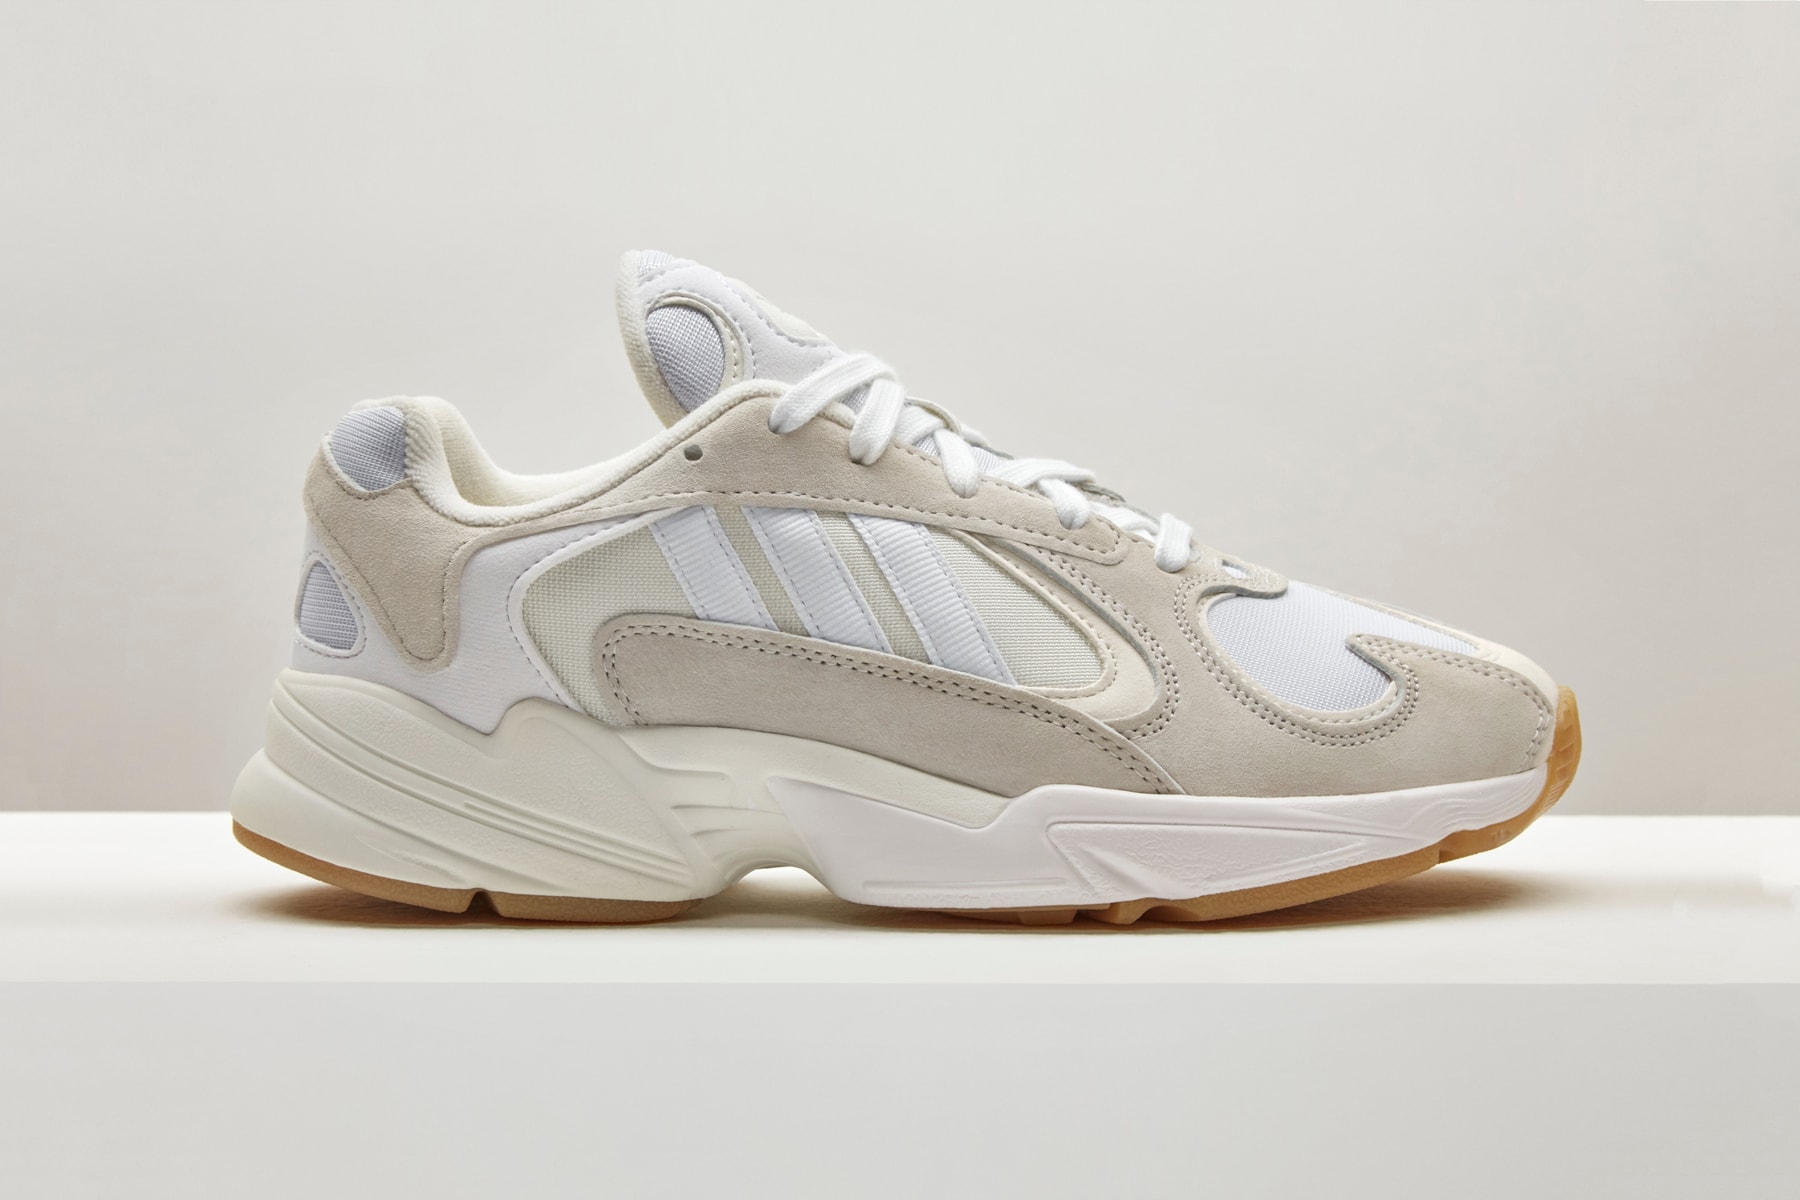 wardrobe nyc x adidas yung 1 one collaboration sneaker colorway exclusive white cream gum sole suede leather exclusive pre order june 18 2018 july drop release date info launch